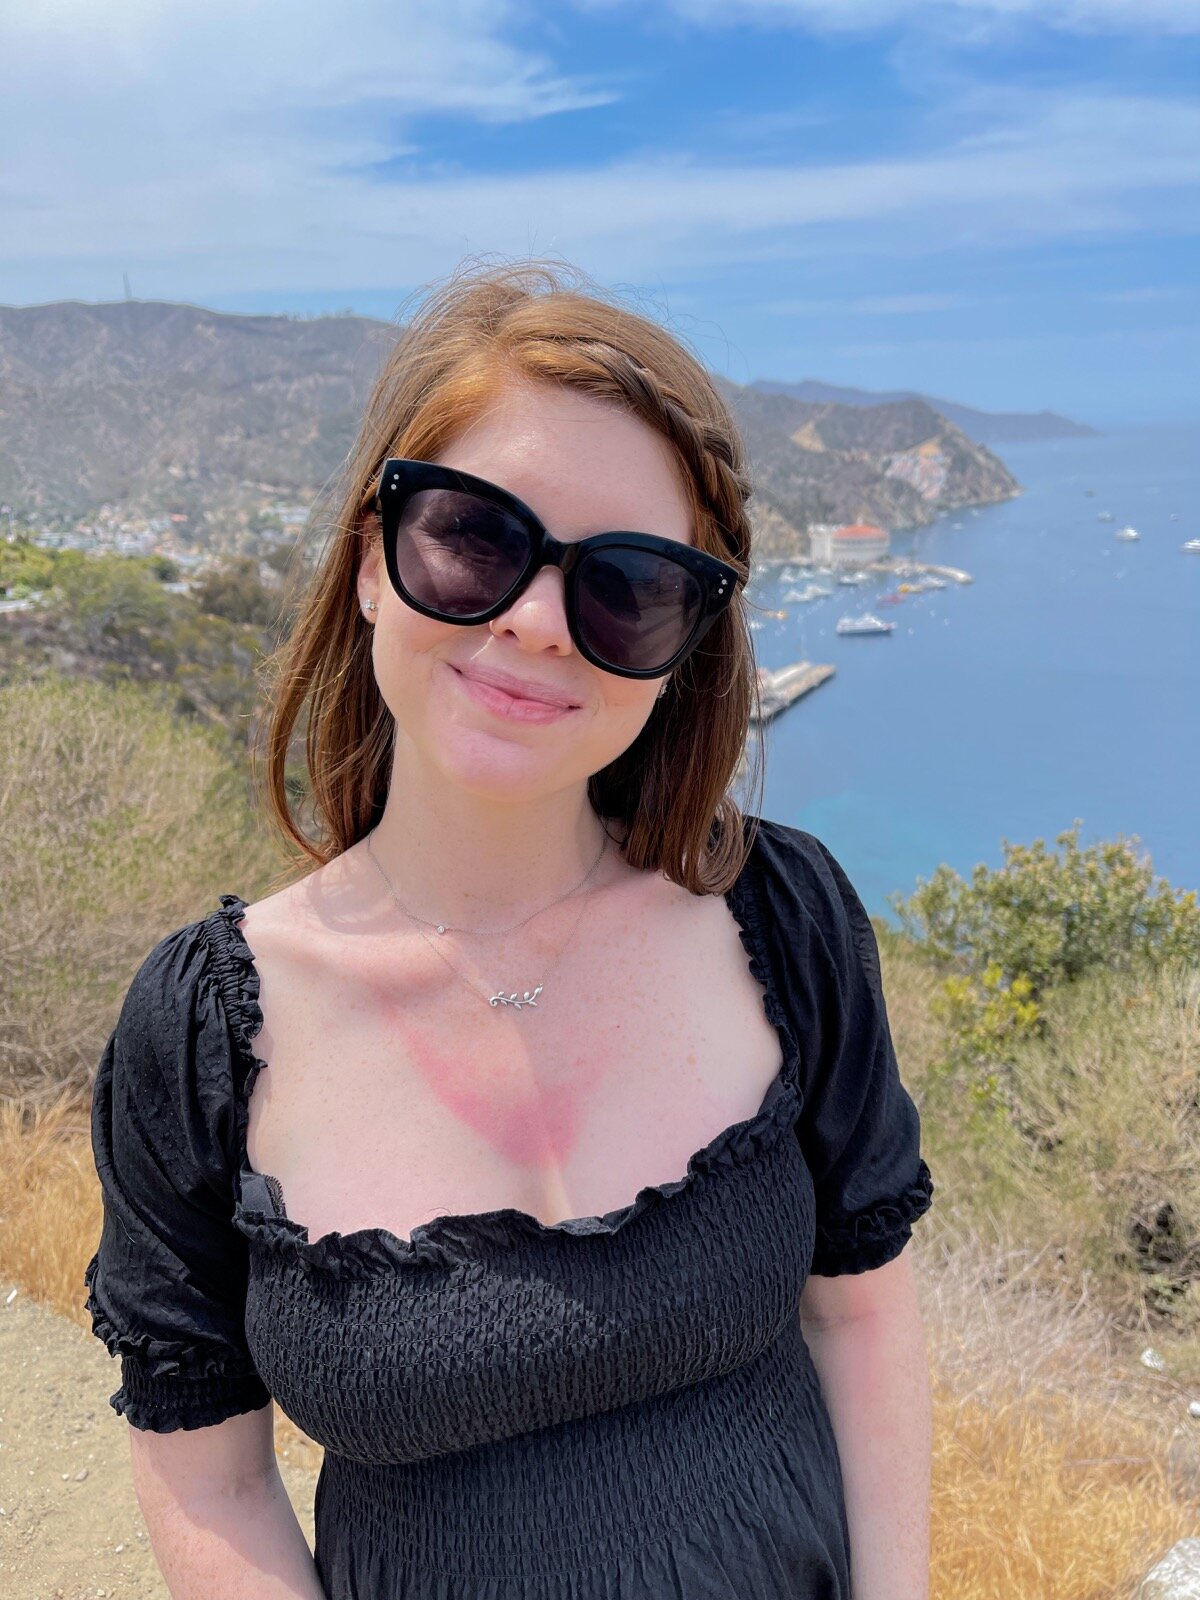 day trip to catalina island, travel guide avalon, two harbors, catalina express, lments of style, la blogger, la day trip, road trip los angeles, what to do on catalina island, is the catalina wine mixer real